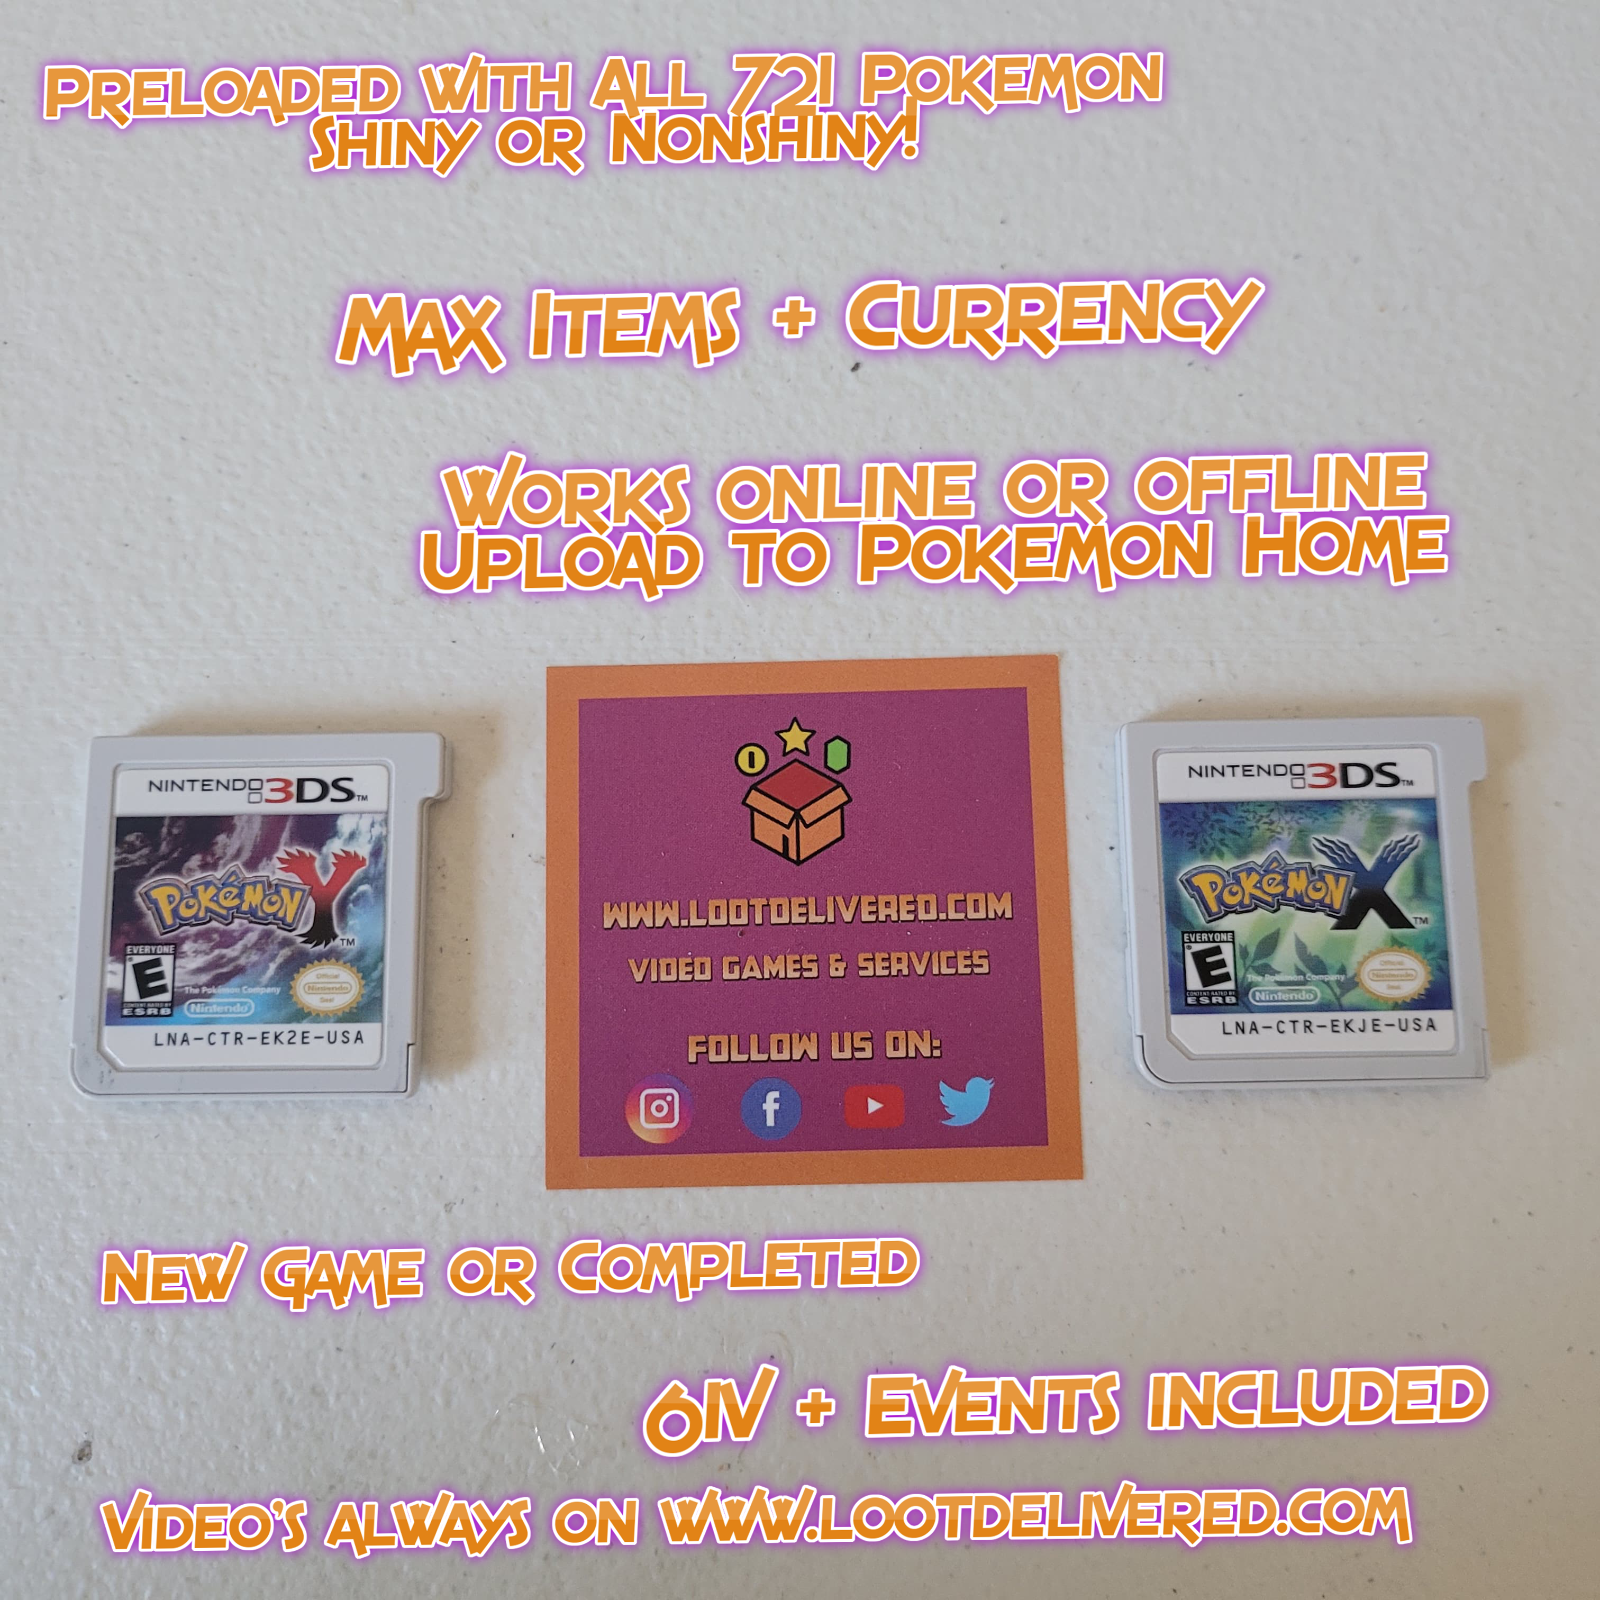 Pokemon Y Enhanced! - All 721 3DS + Legit With Loaded Game) Pokemon (Physcial Enhanced Event